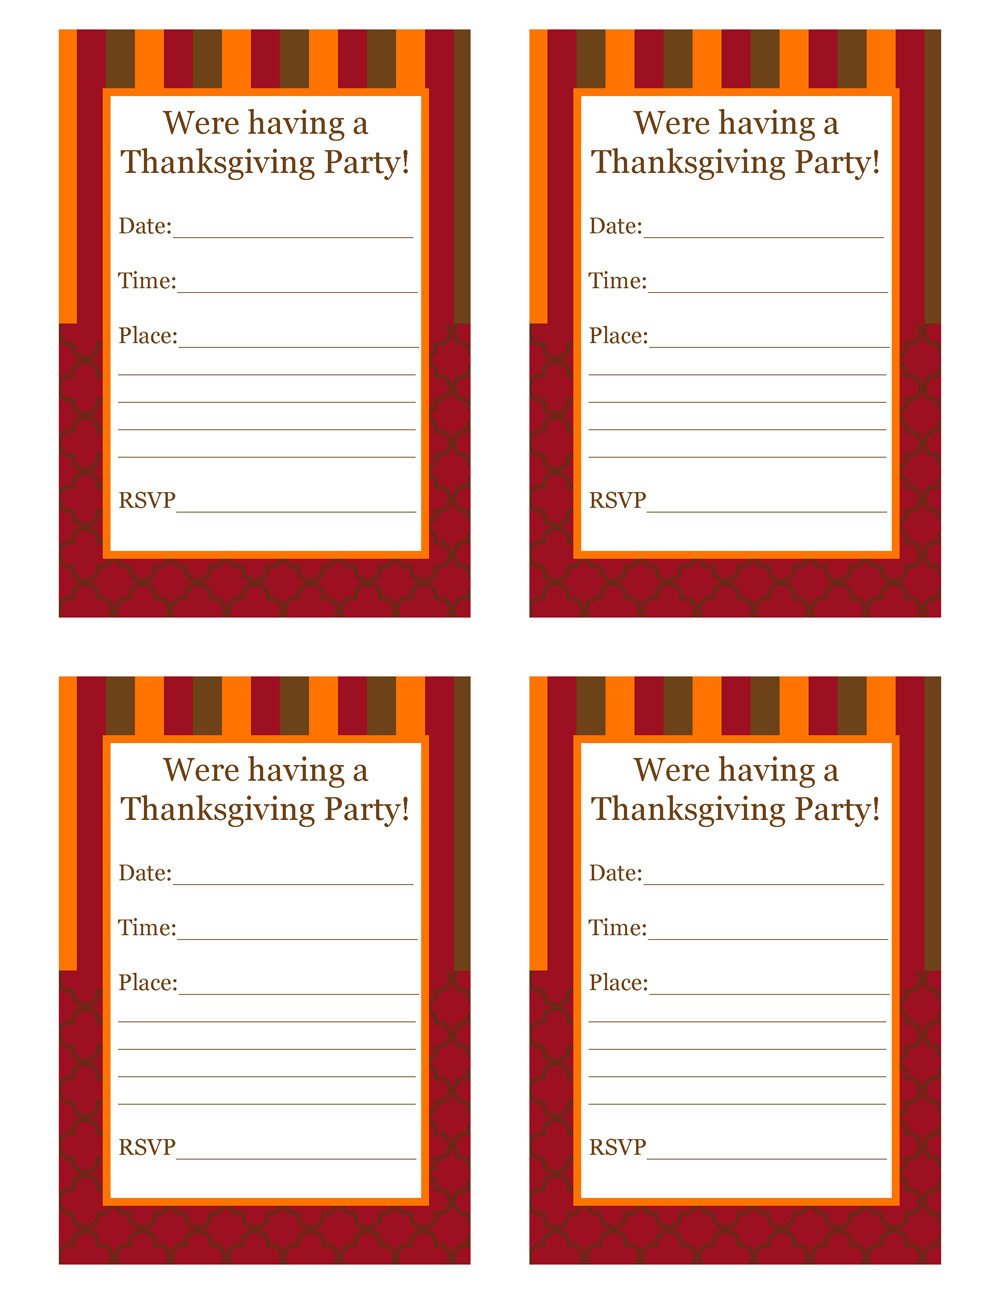 FREE Thanksgiving Party Printables from Cupcake Express